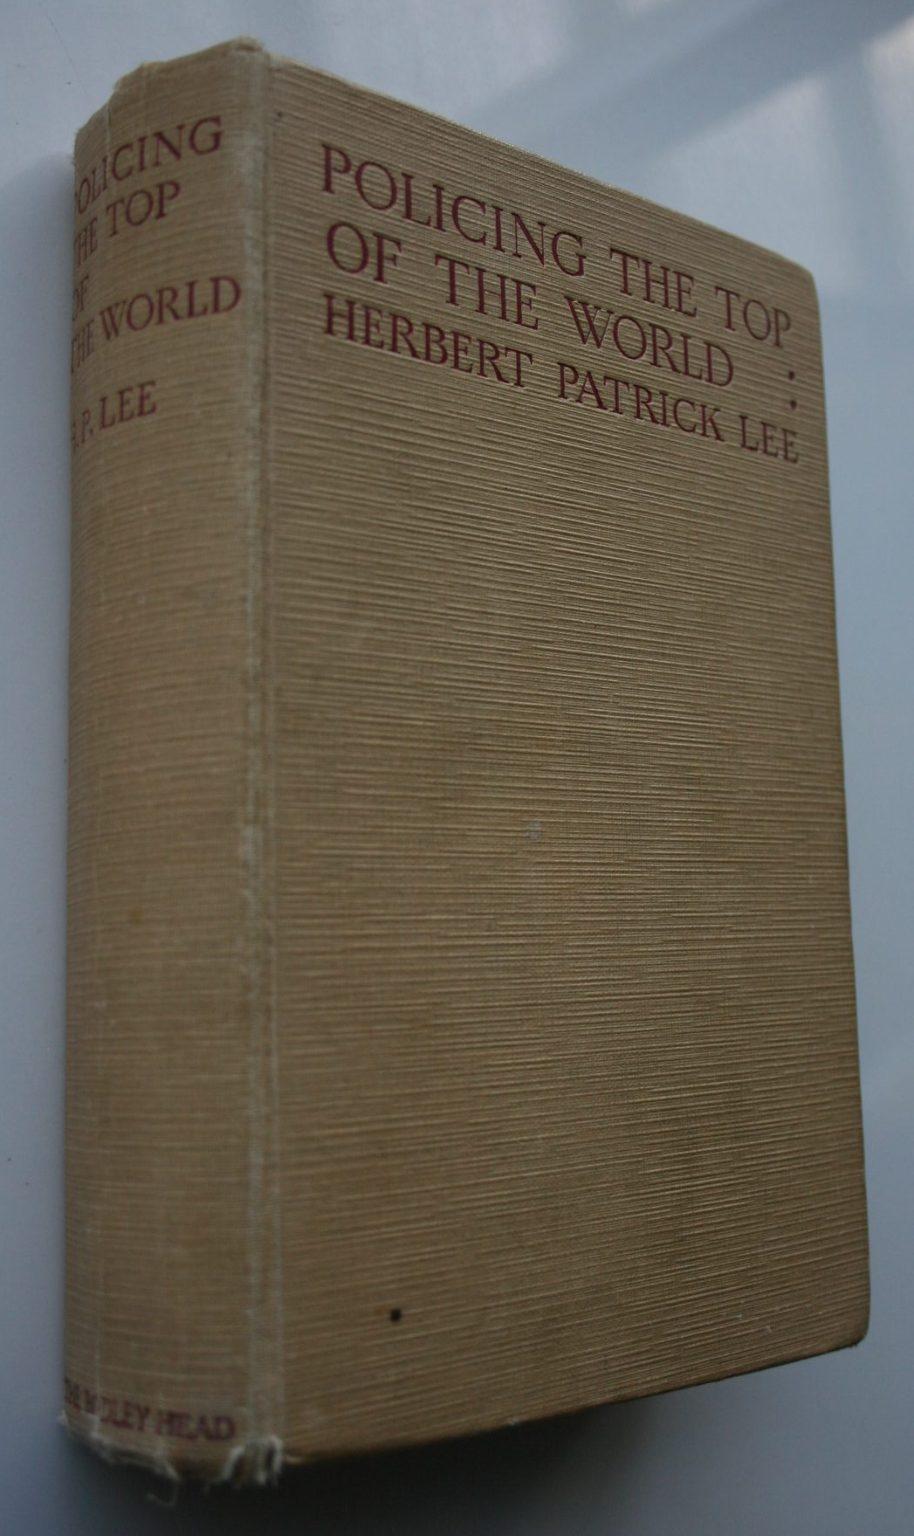 Policing the Top of the World. 1928 First Edition. by Herbert Patrick Lee